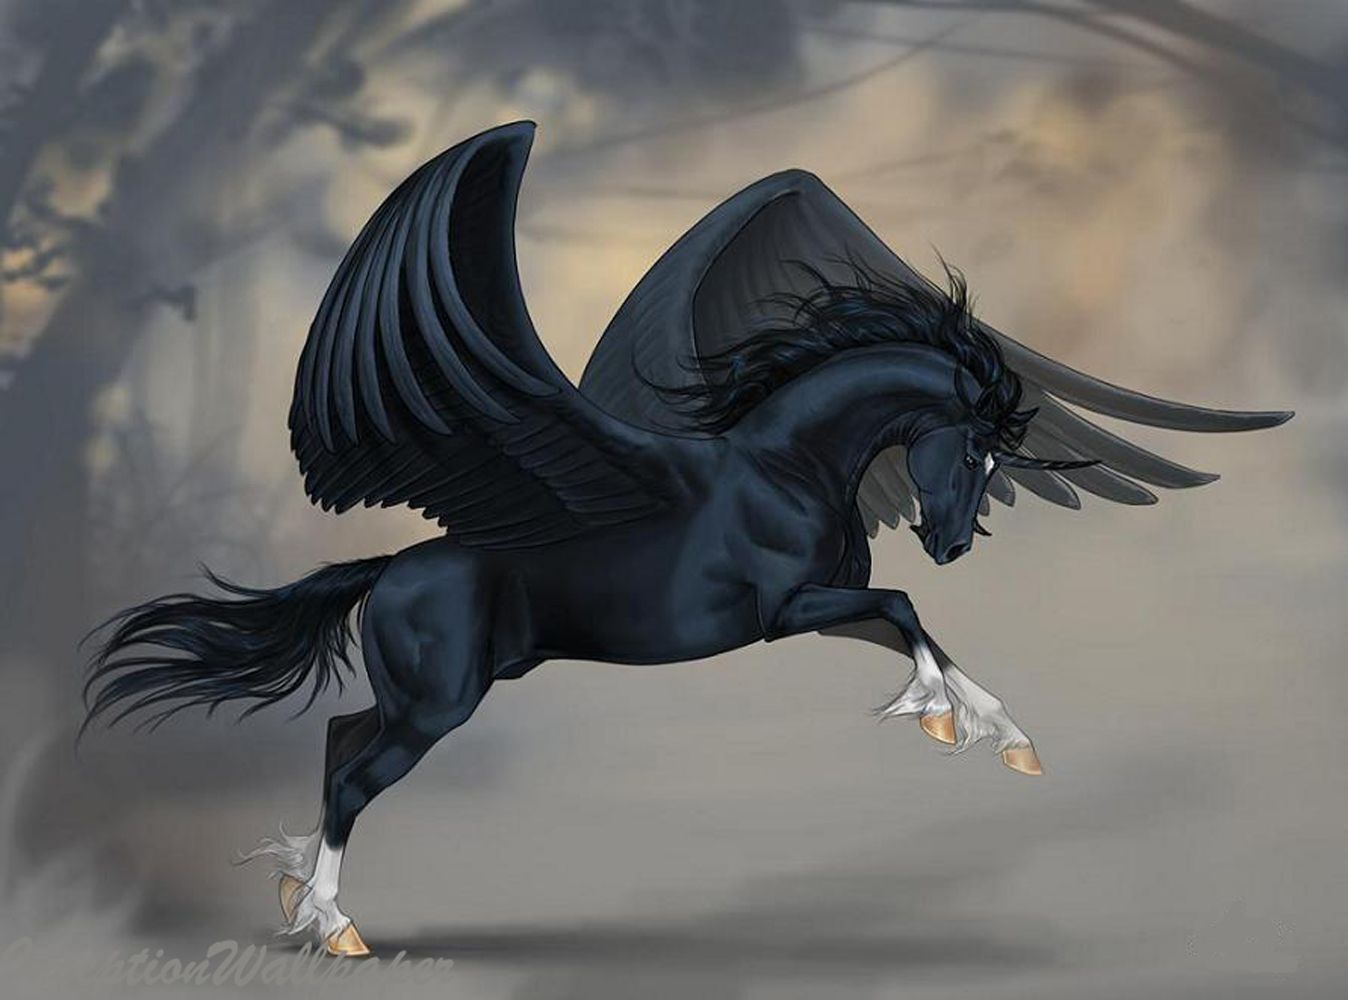 Black Unicorns with Wings Wallpaper